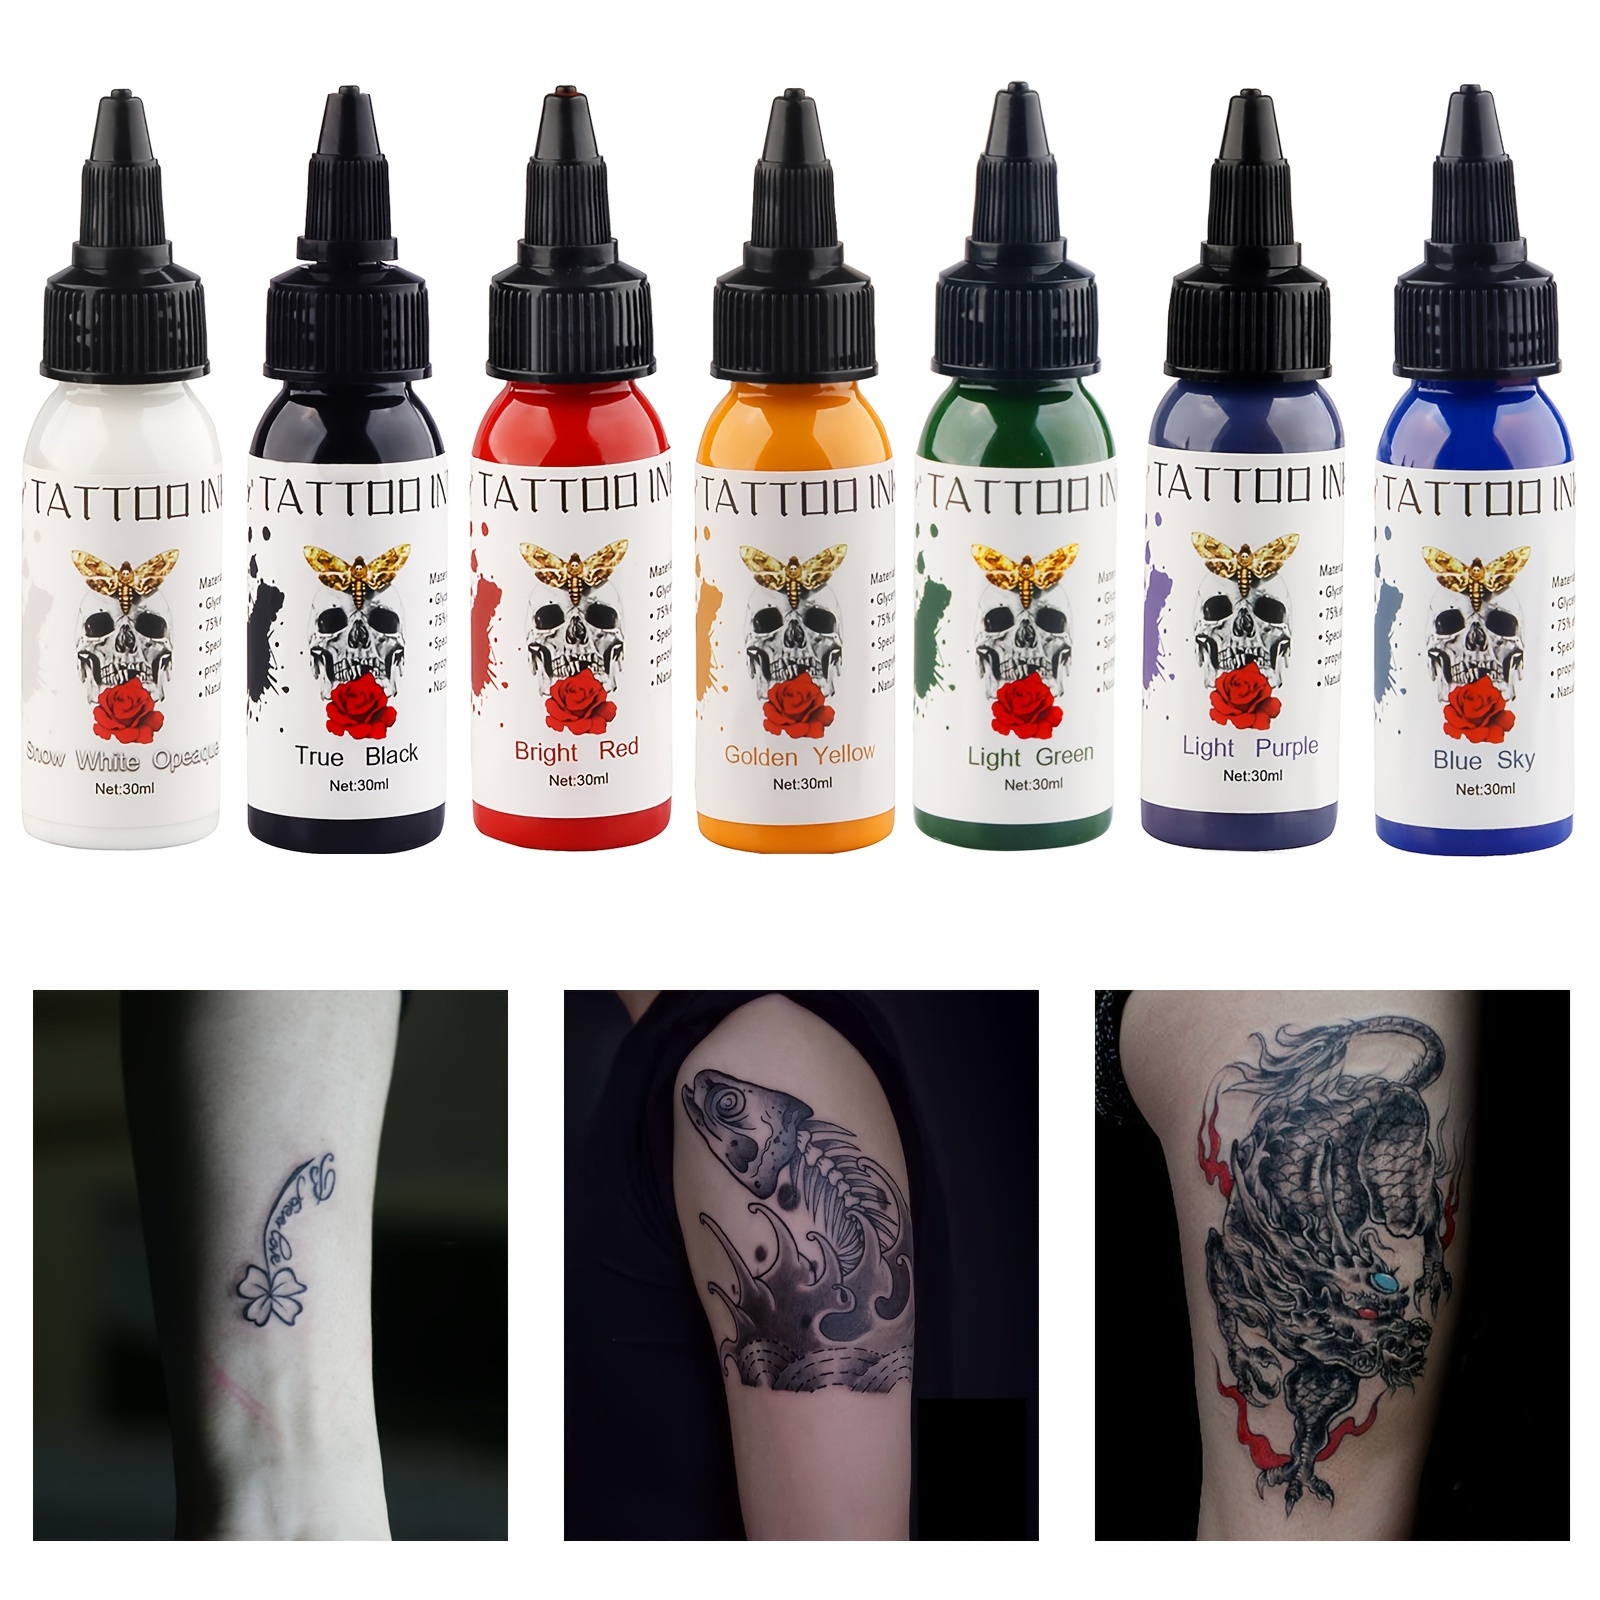 Making Tattoo Ink With Activated Charcoal: An Ancient Art With A Modern  Twist | LahinchTavernAndGrill.com